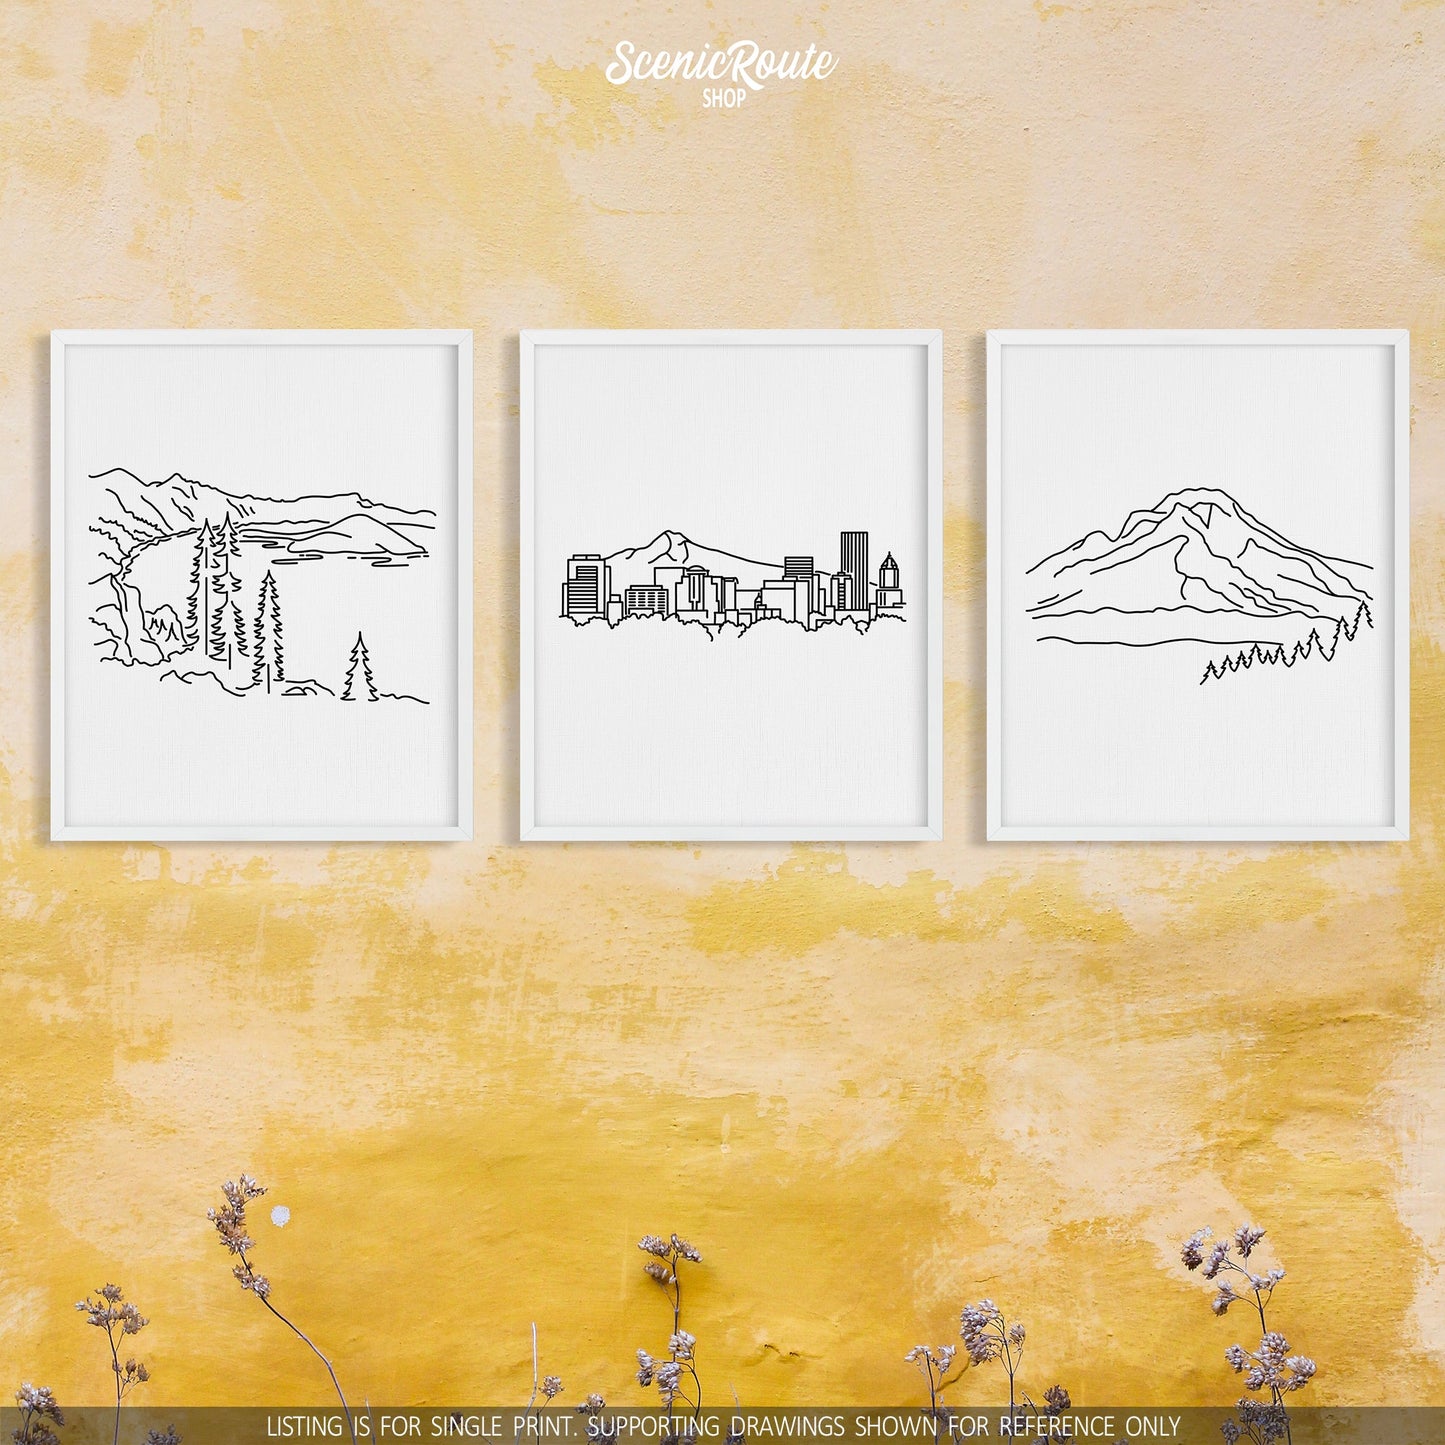 A group of three framed drawings on a yellow wall. The line art drawings include Crater Lake National Park, the Portland Skyline, and Mount Hood